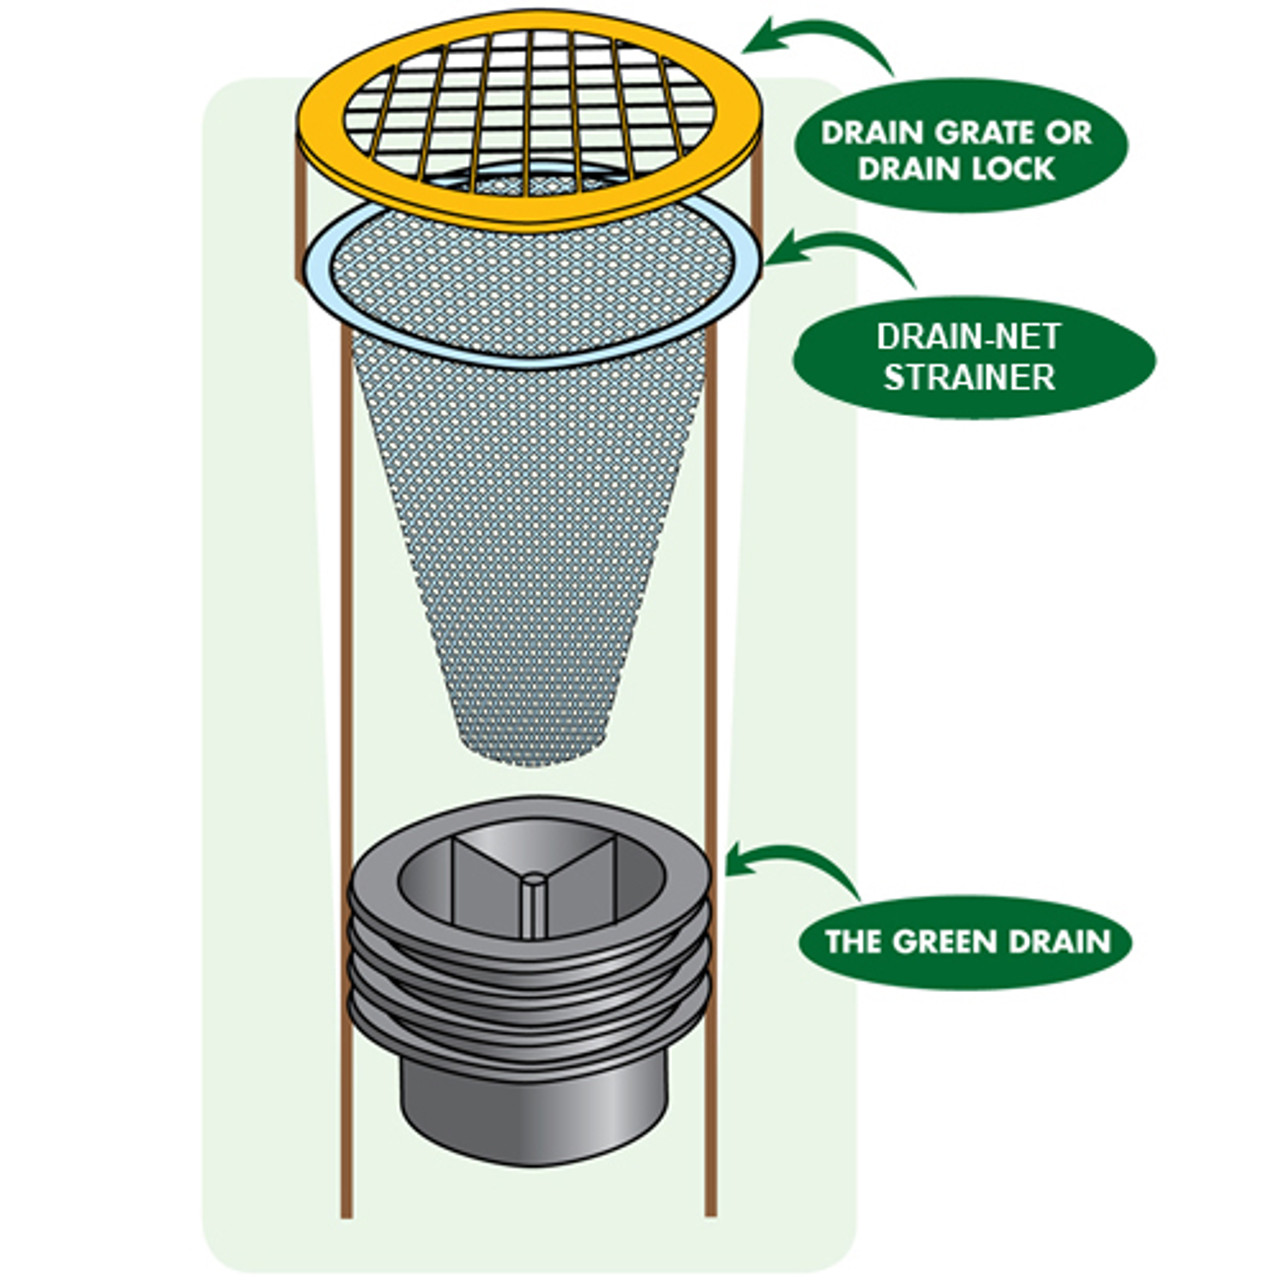 The Green Drain can be installed into drain pipes below the drain grate, drain lock, or Drain-Net drain strainer (for catching debris).